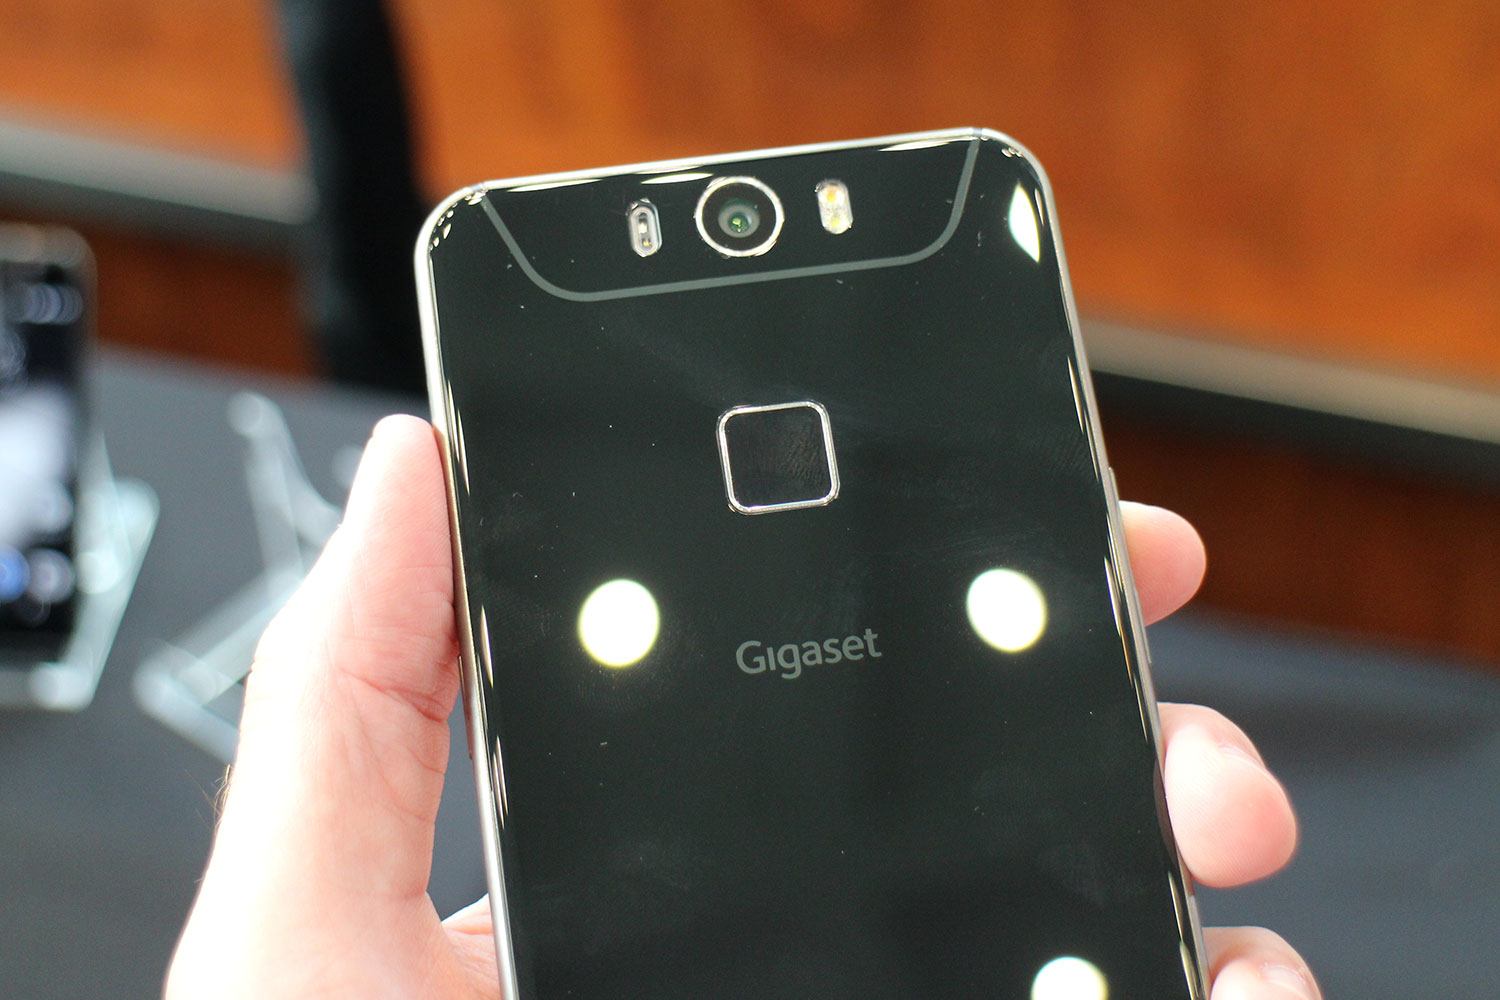 Gigaset Android phones